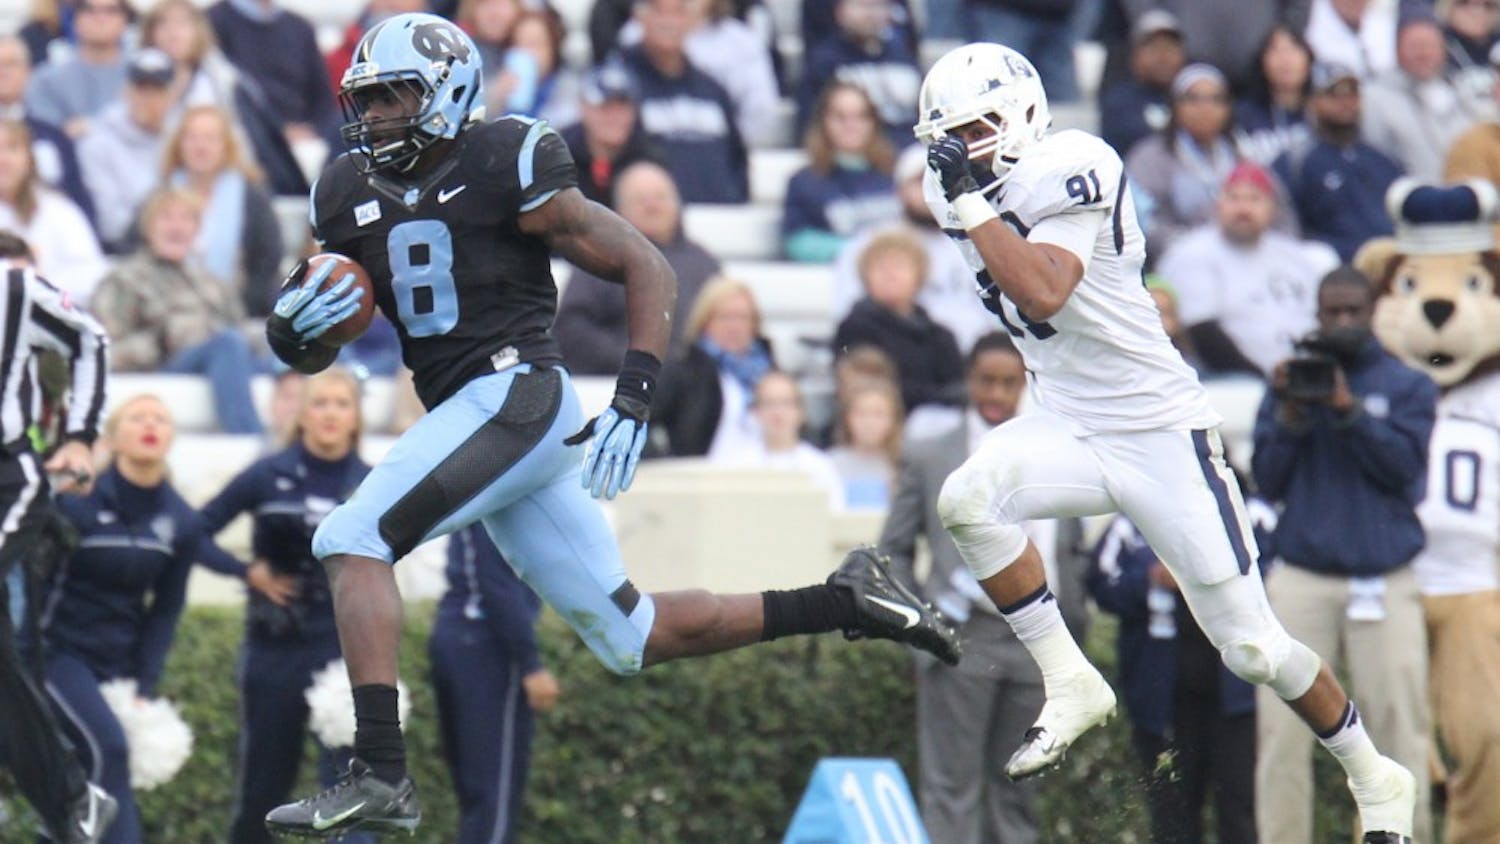 Photos from UNC football's game against Old Dominion on November 23 at Kenan Stadium in Chapel Hill.